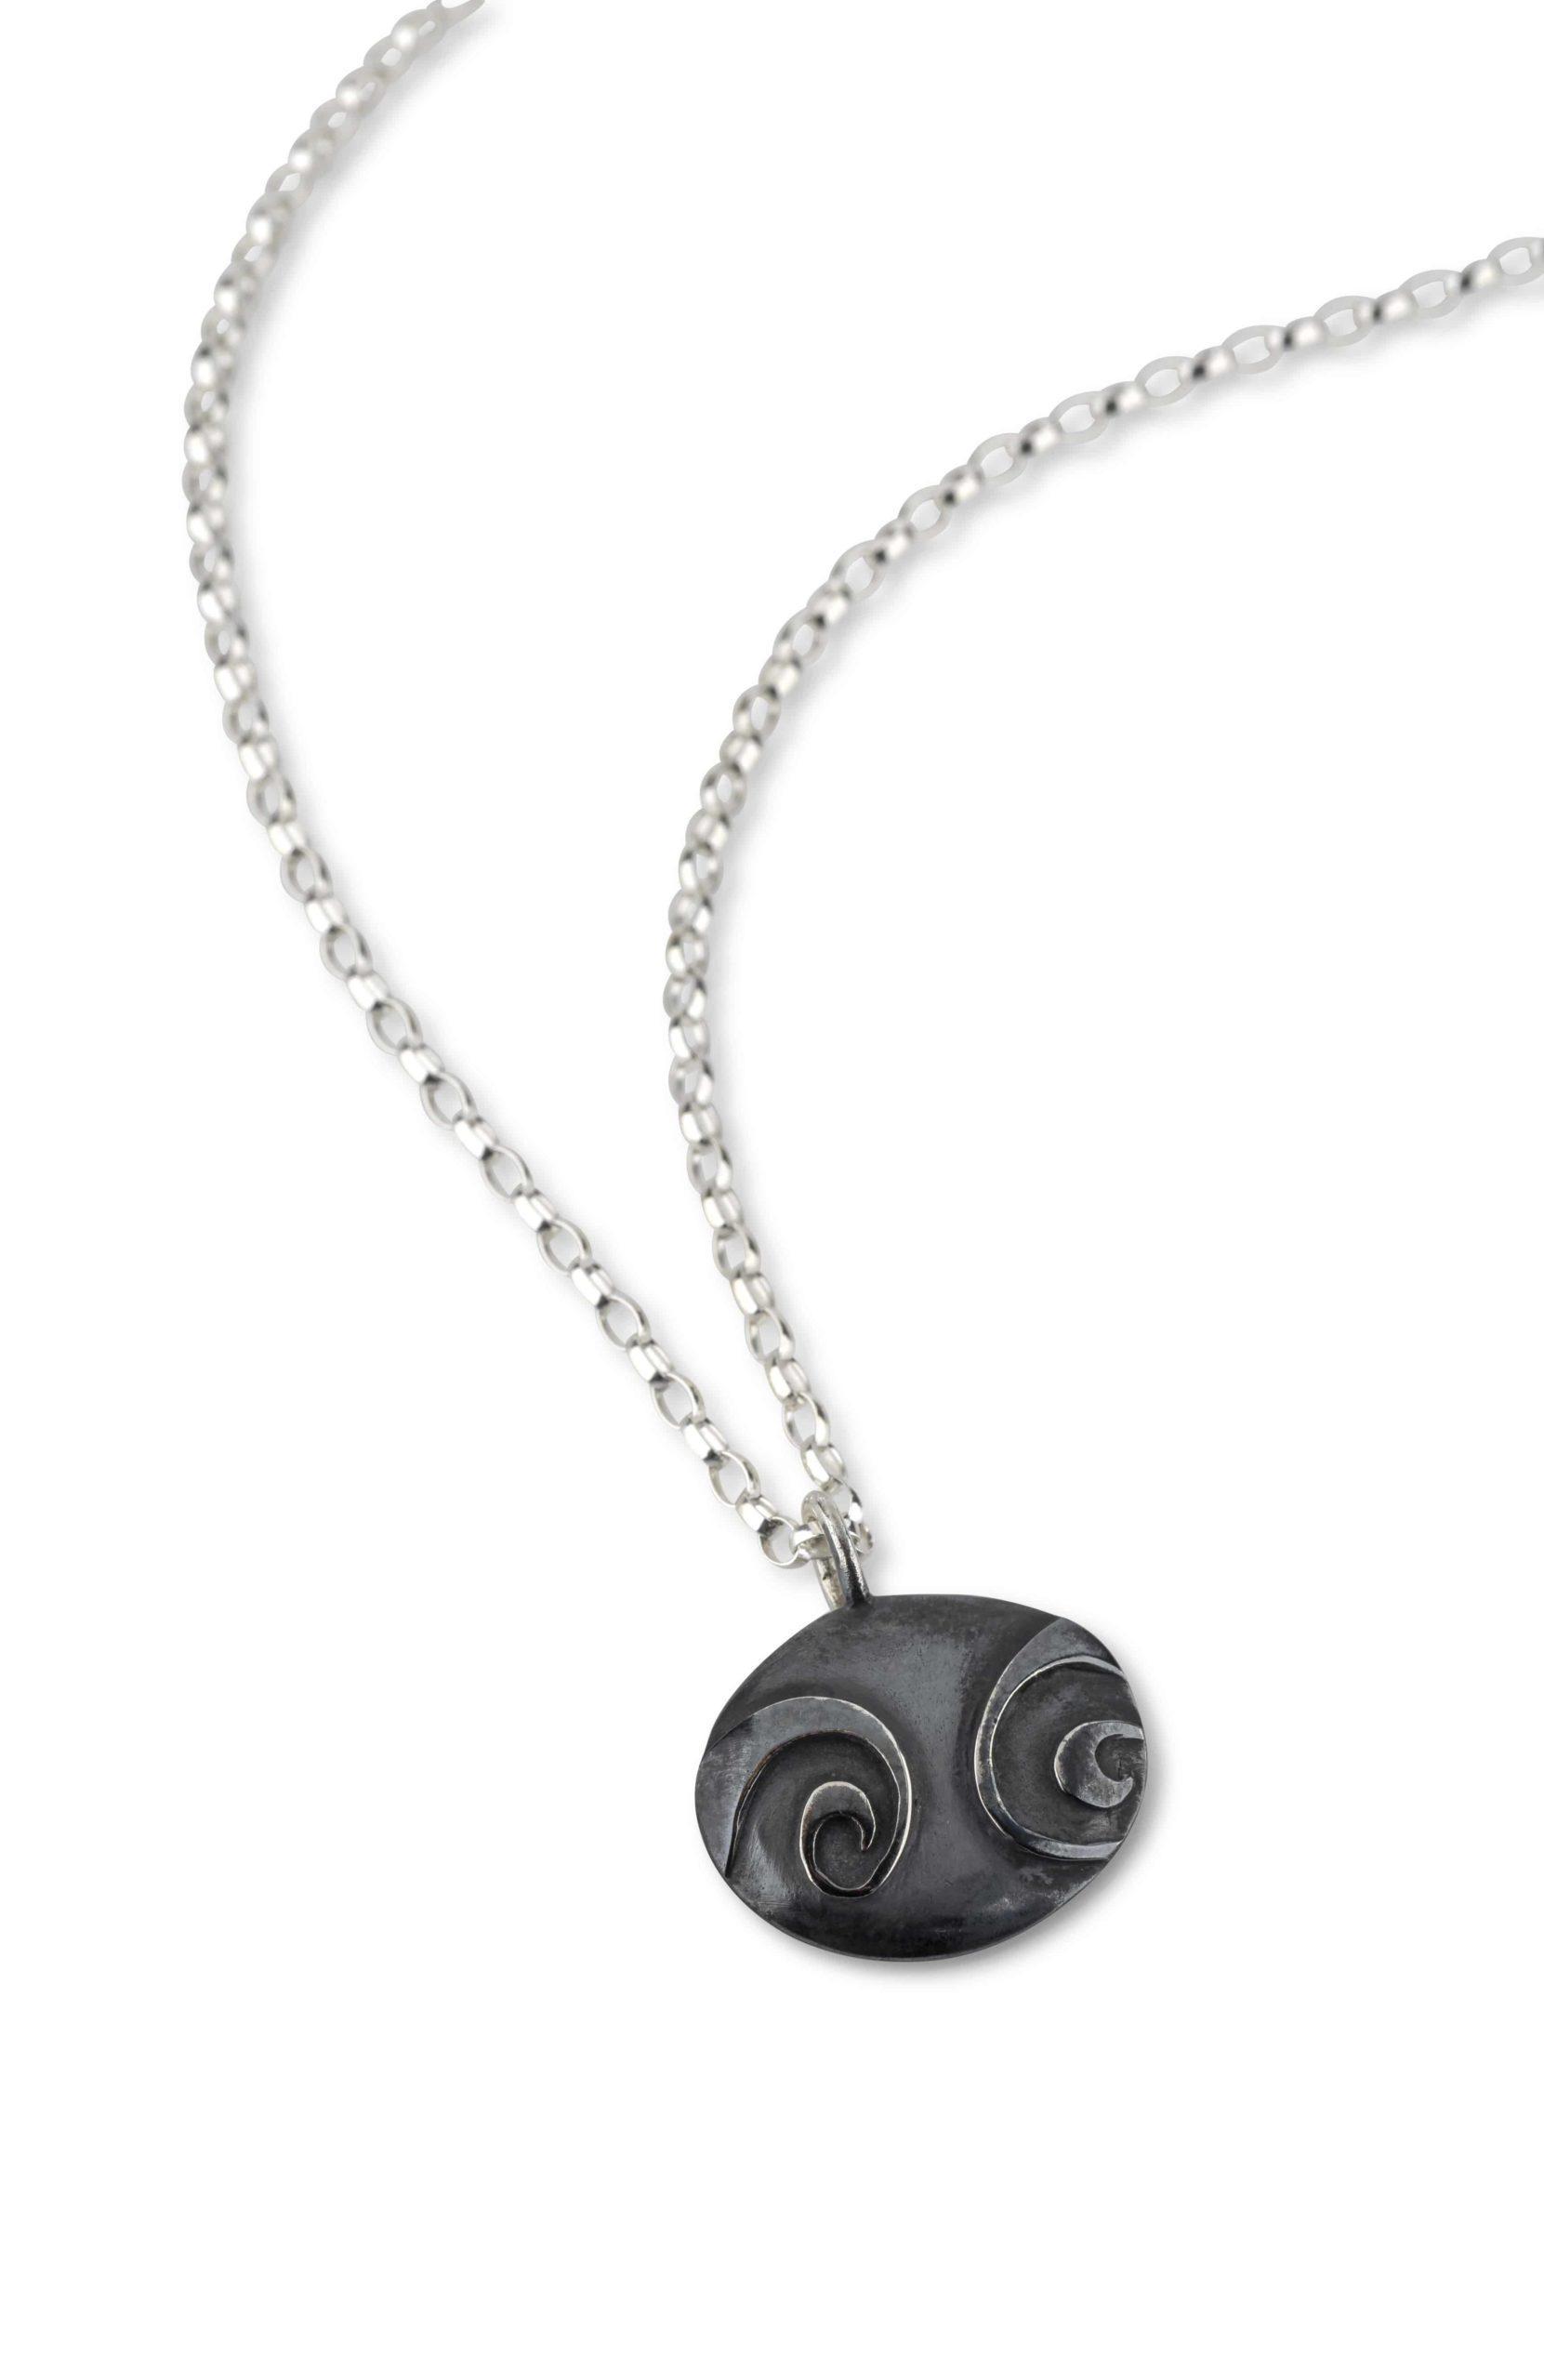 Spiral Pebble Collection Medium Pendant and Chain